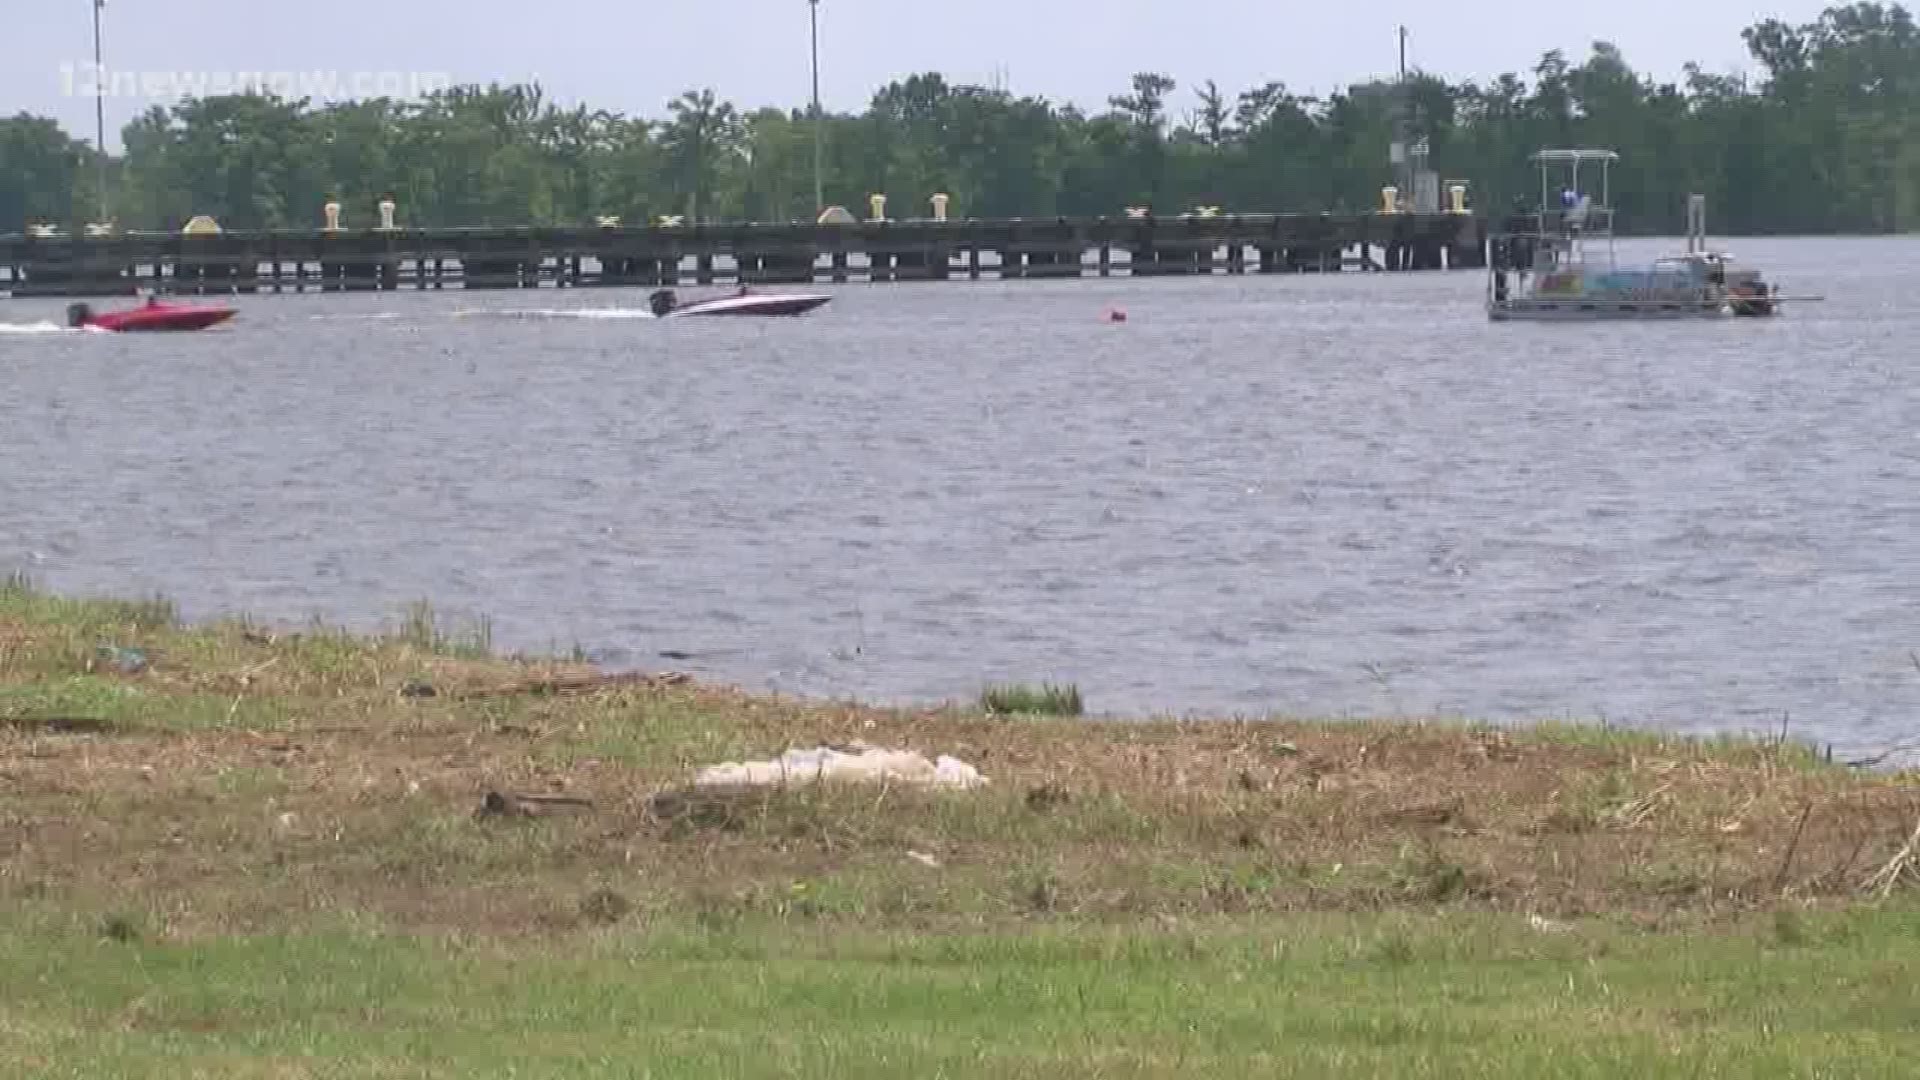 Shootout on the Sabine drag boat race